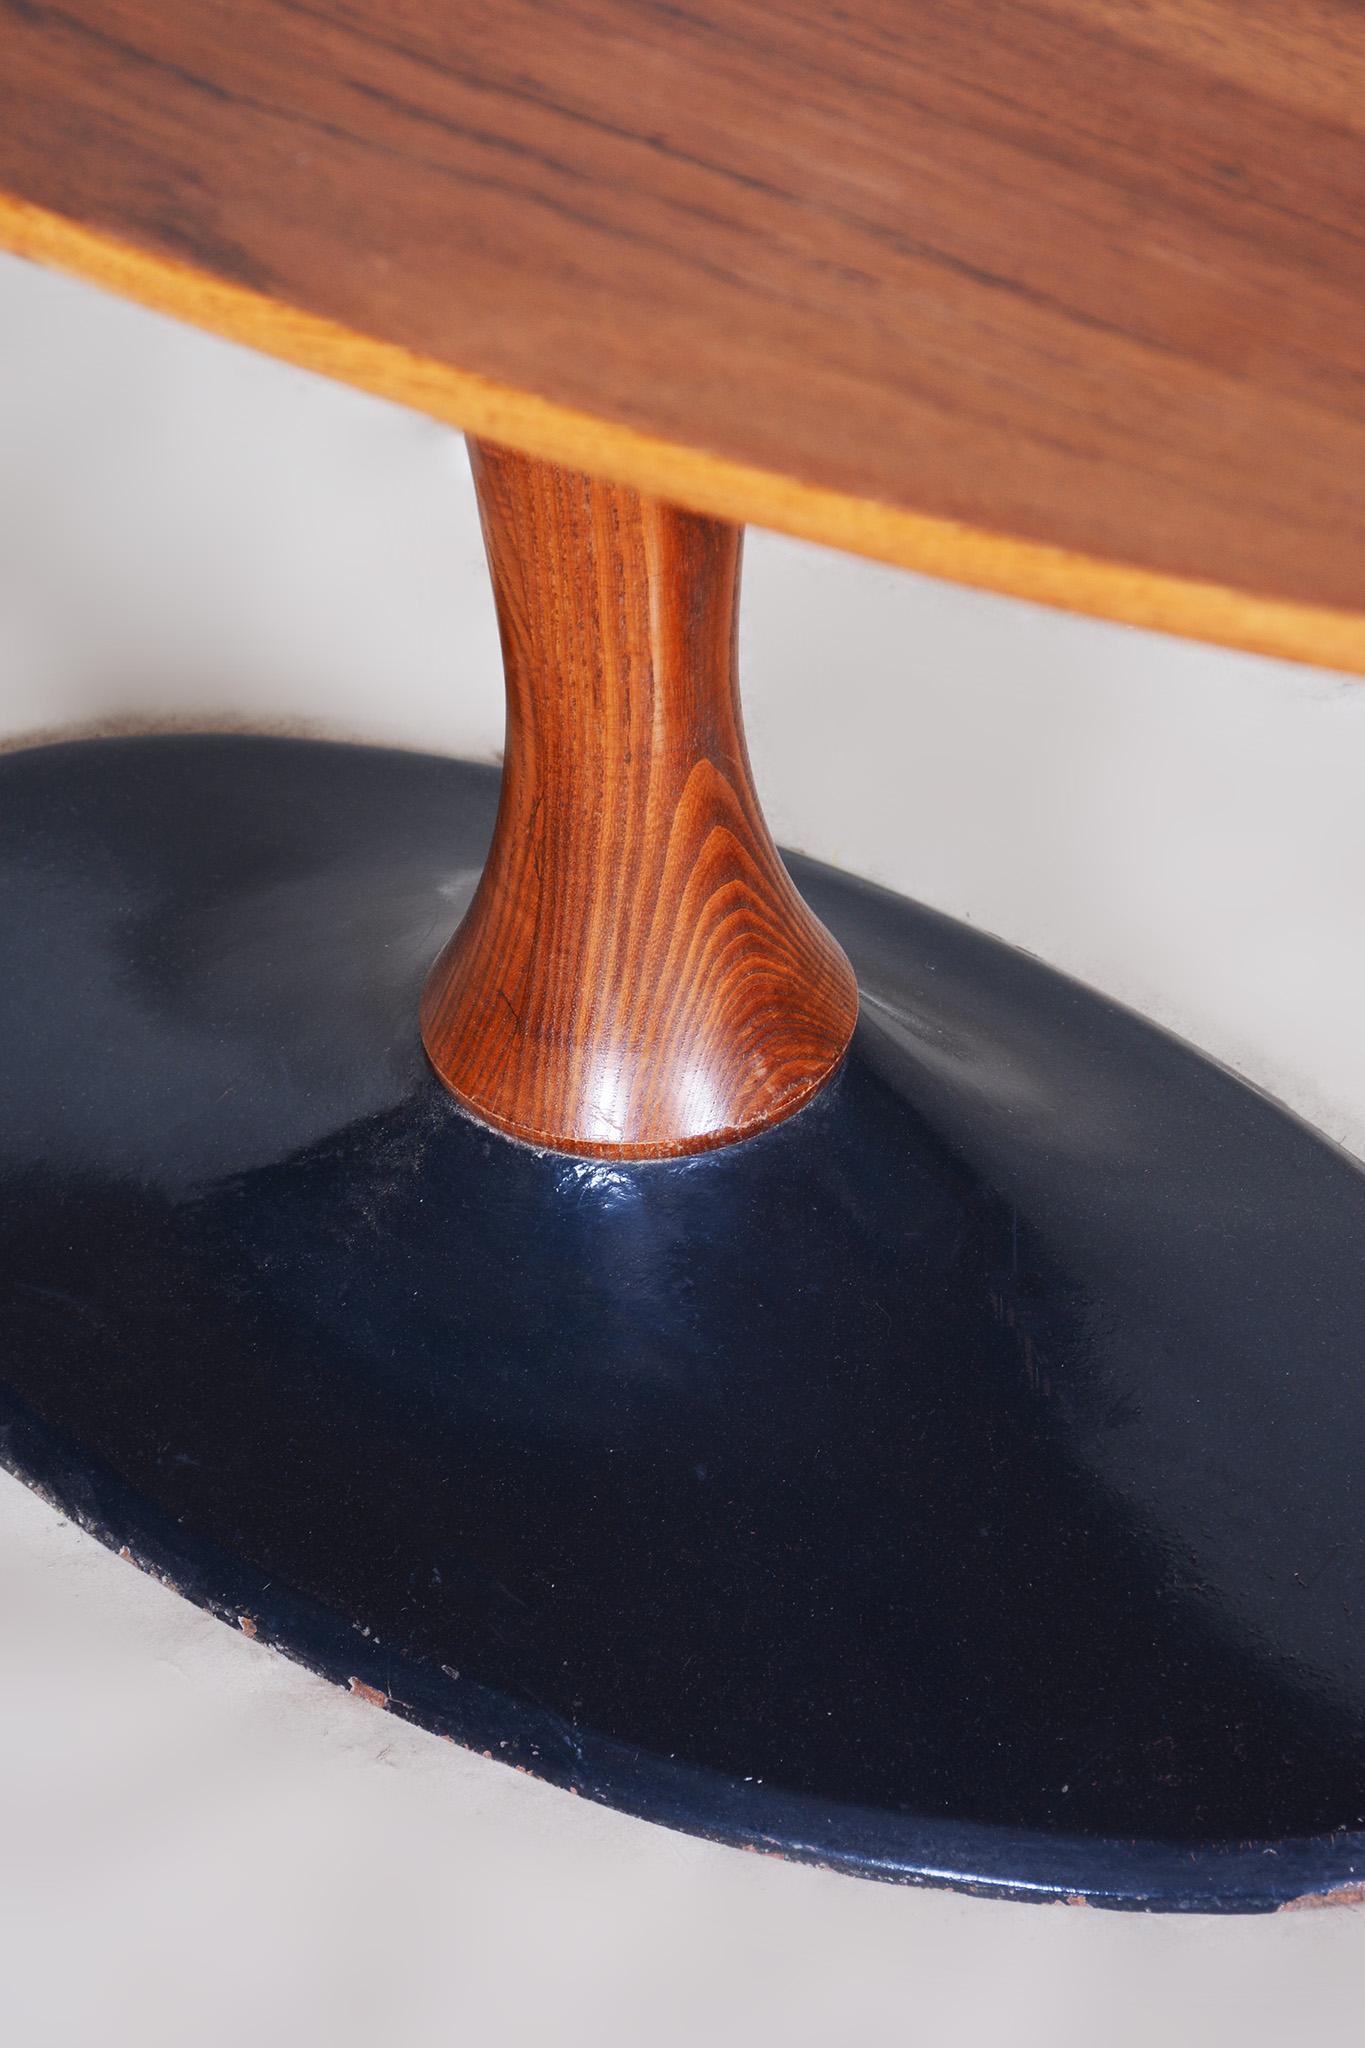 Czech Mid-Century Rosewood Oval Table with Cast Iron Base, 1950s For Sale 3